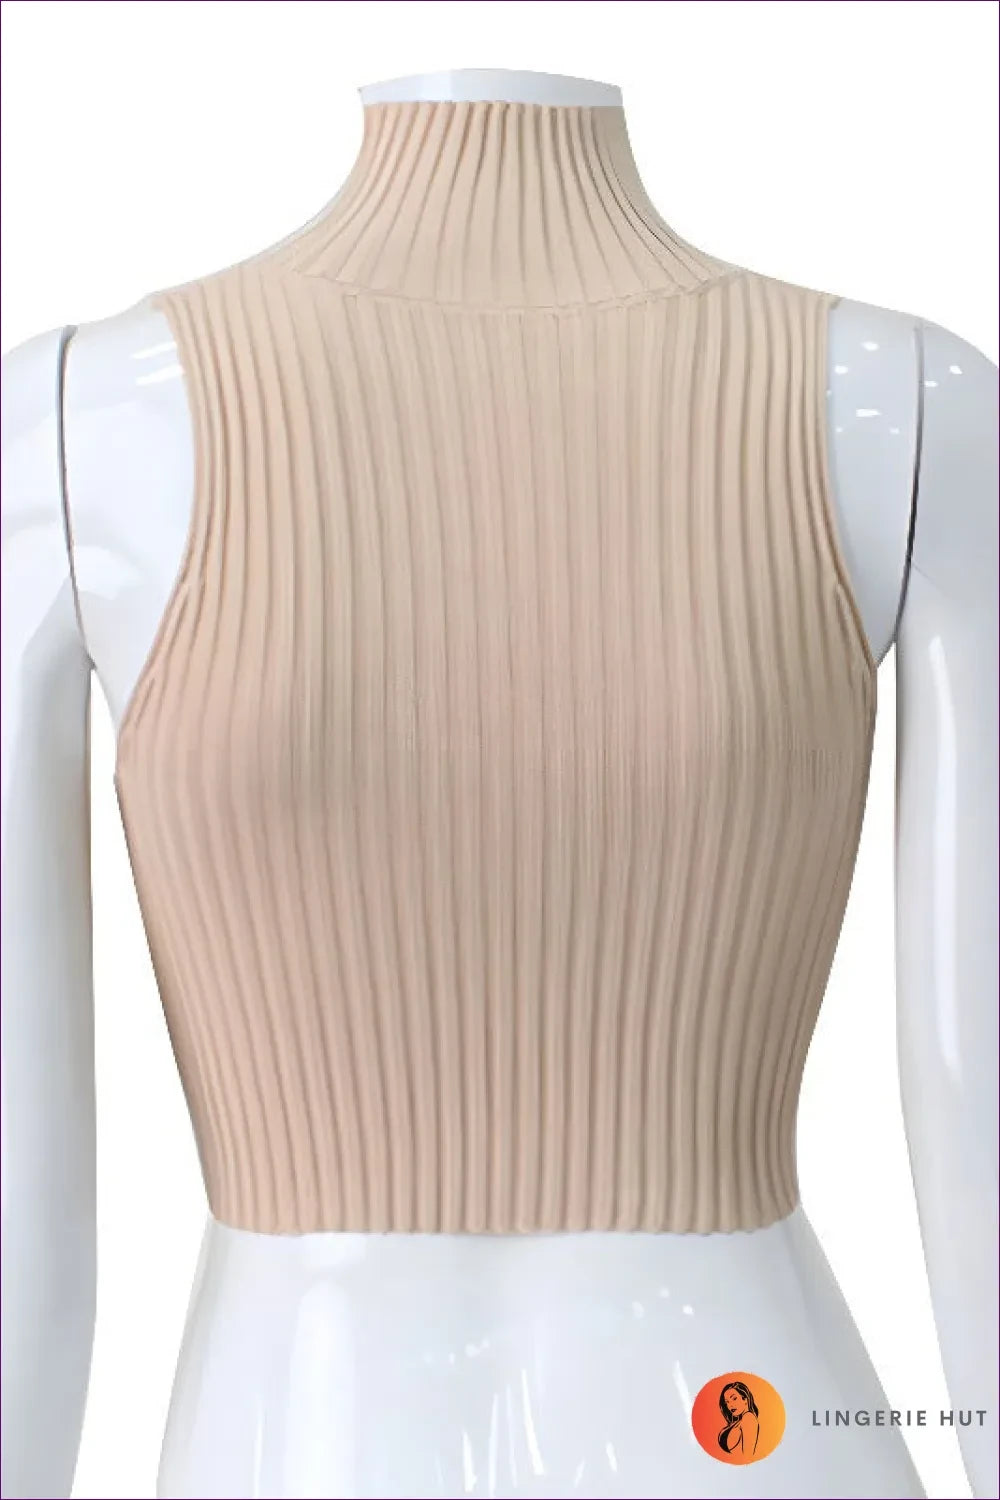 Get a Show-stopping Look With Our Turtleneck Keyhole Ribbed Top. Soft Ribbed Knit Fabric, Turtleneck, Keyhole